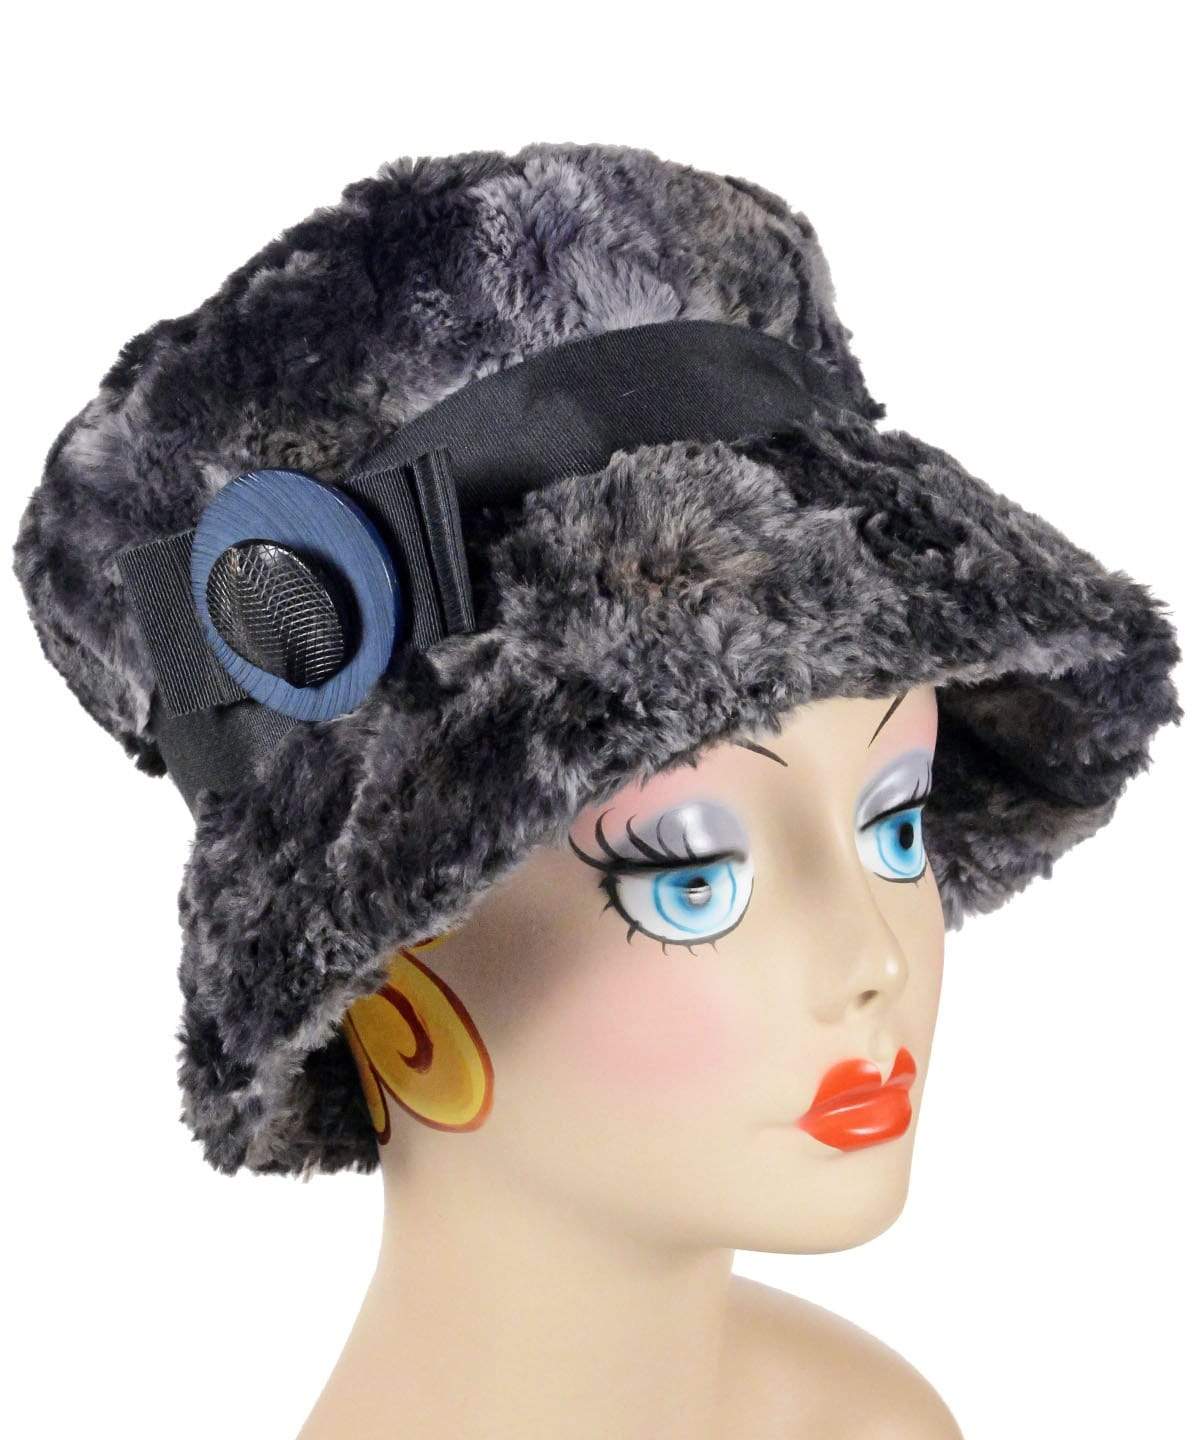 Molly Hat in Highland Skye Faux Fur With Black Band featuring a Black and Navy Double Stock Button | Handmade By Pandemonium Millinery | Seattle WA USA